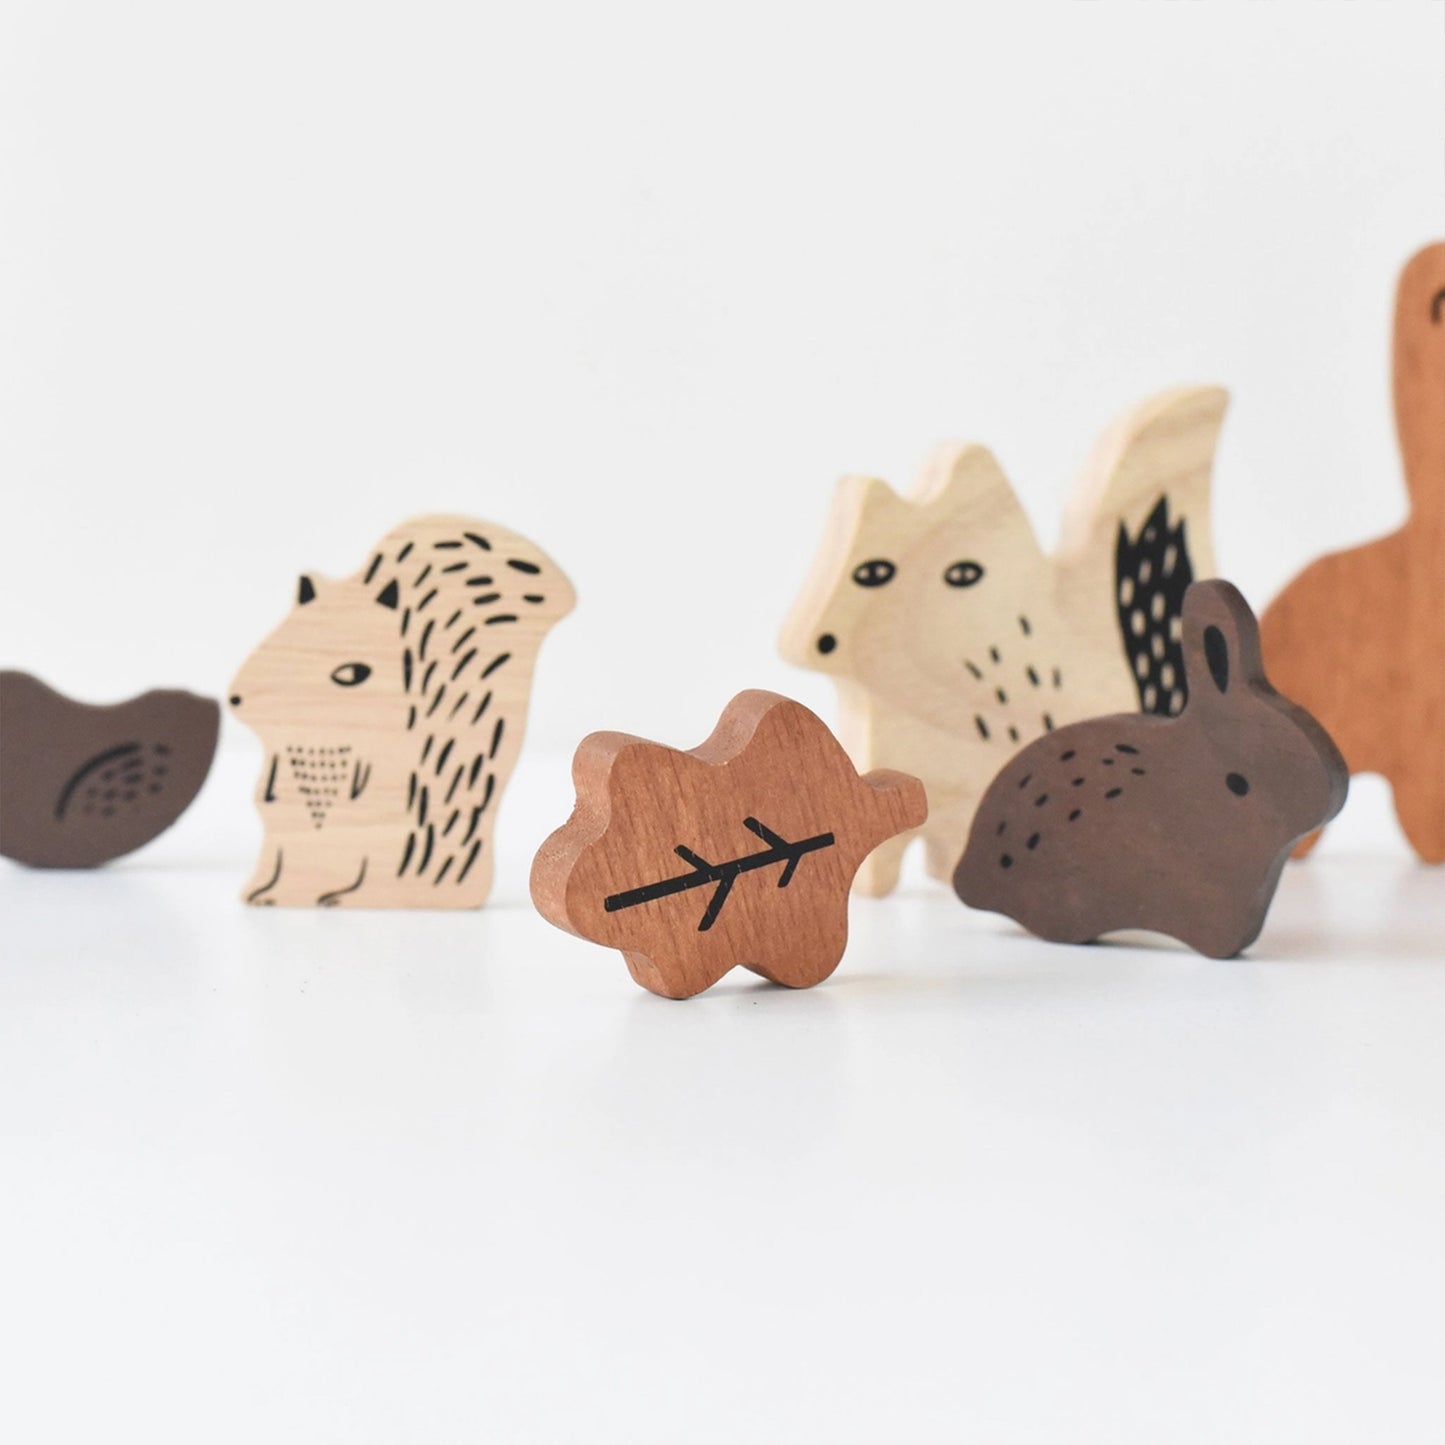 Wooden Tray Puzzle: Woodland Animals